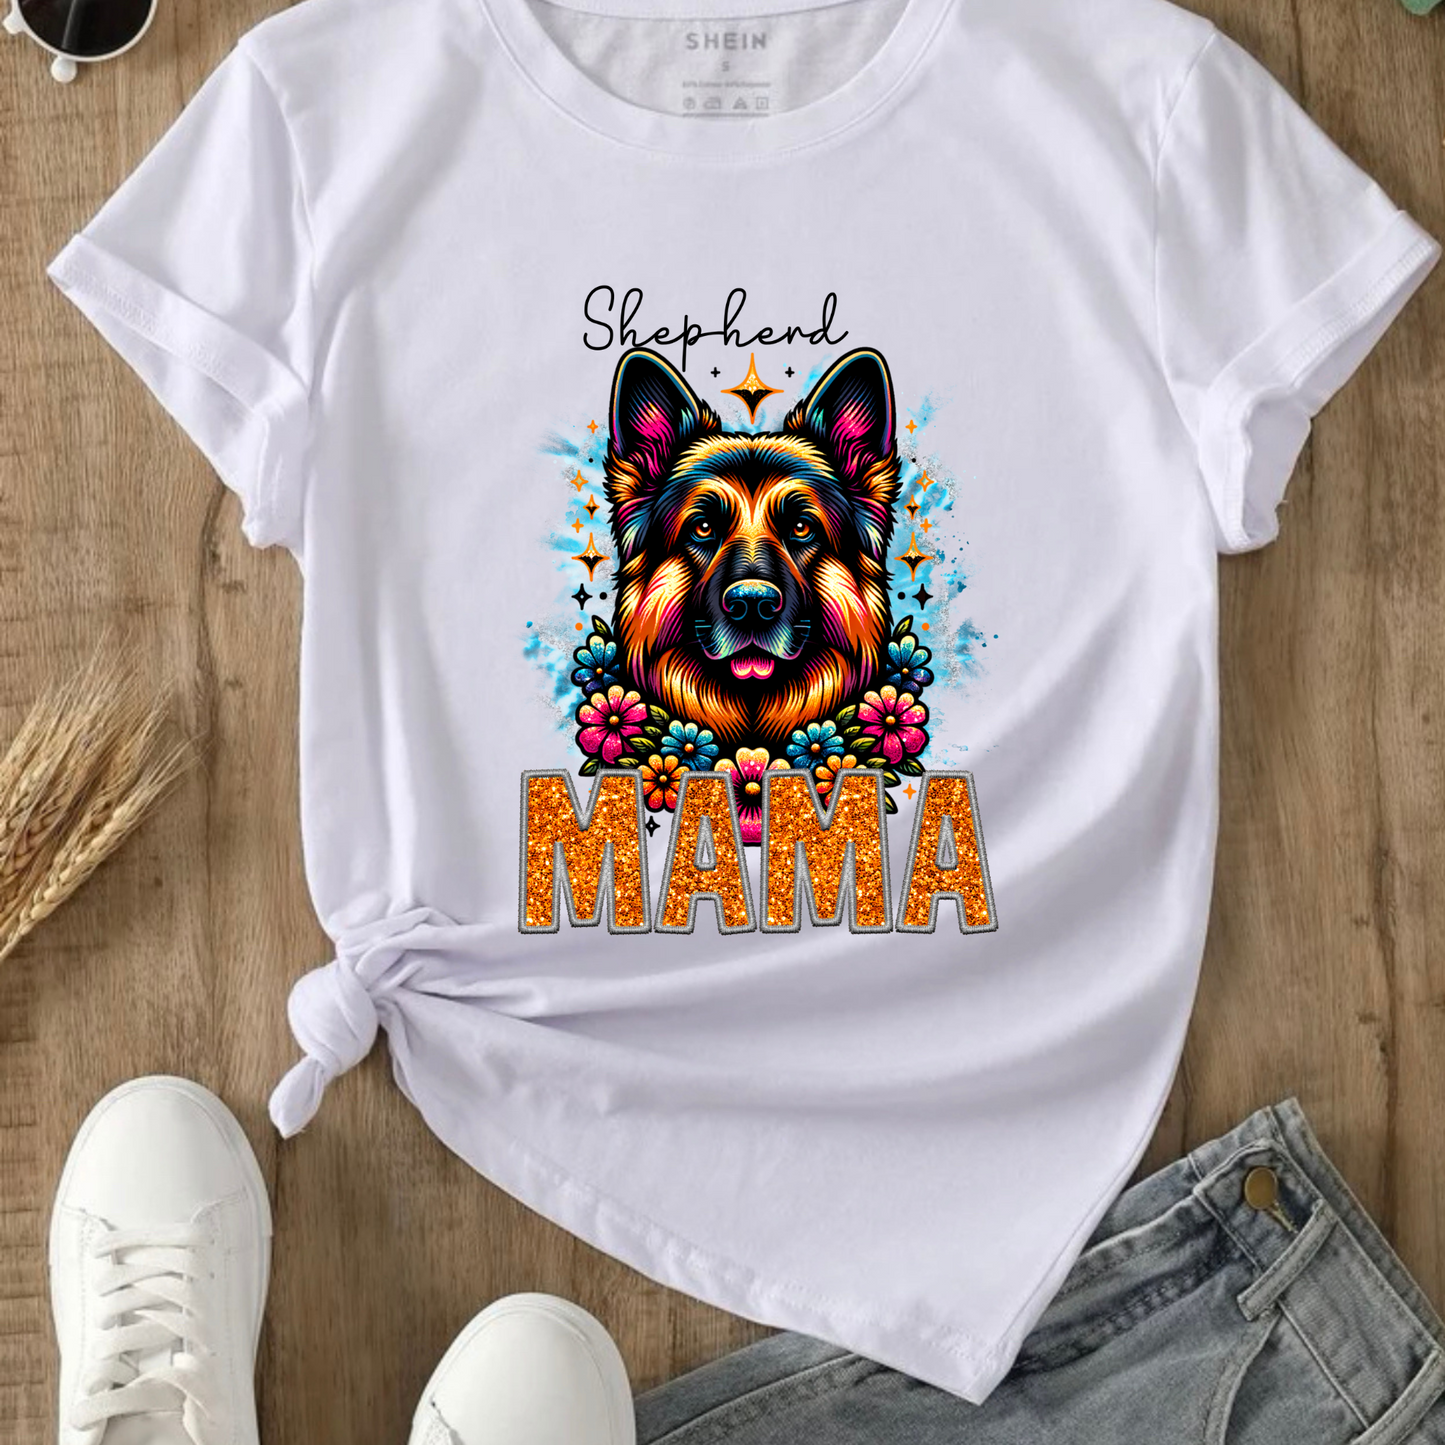 SHEPARD MAMA DESIGN! YOU CHOOSE COLOR AND STYLE! TEE OR CREWNECK! BLEACHED OR NON-BLEACHED